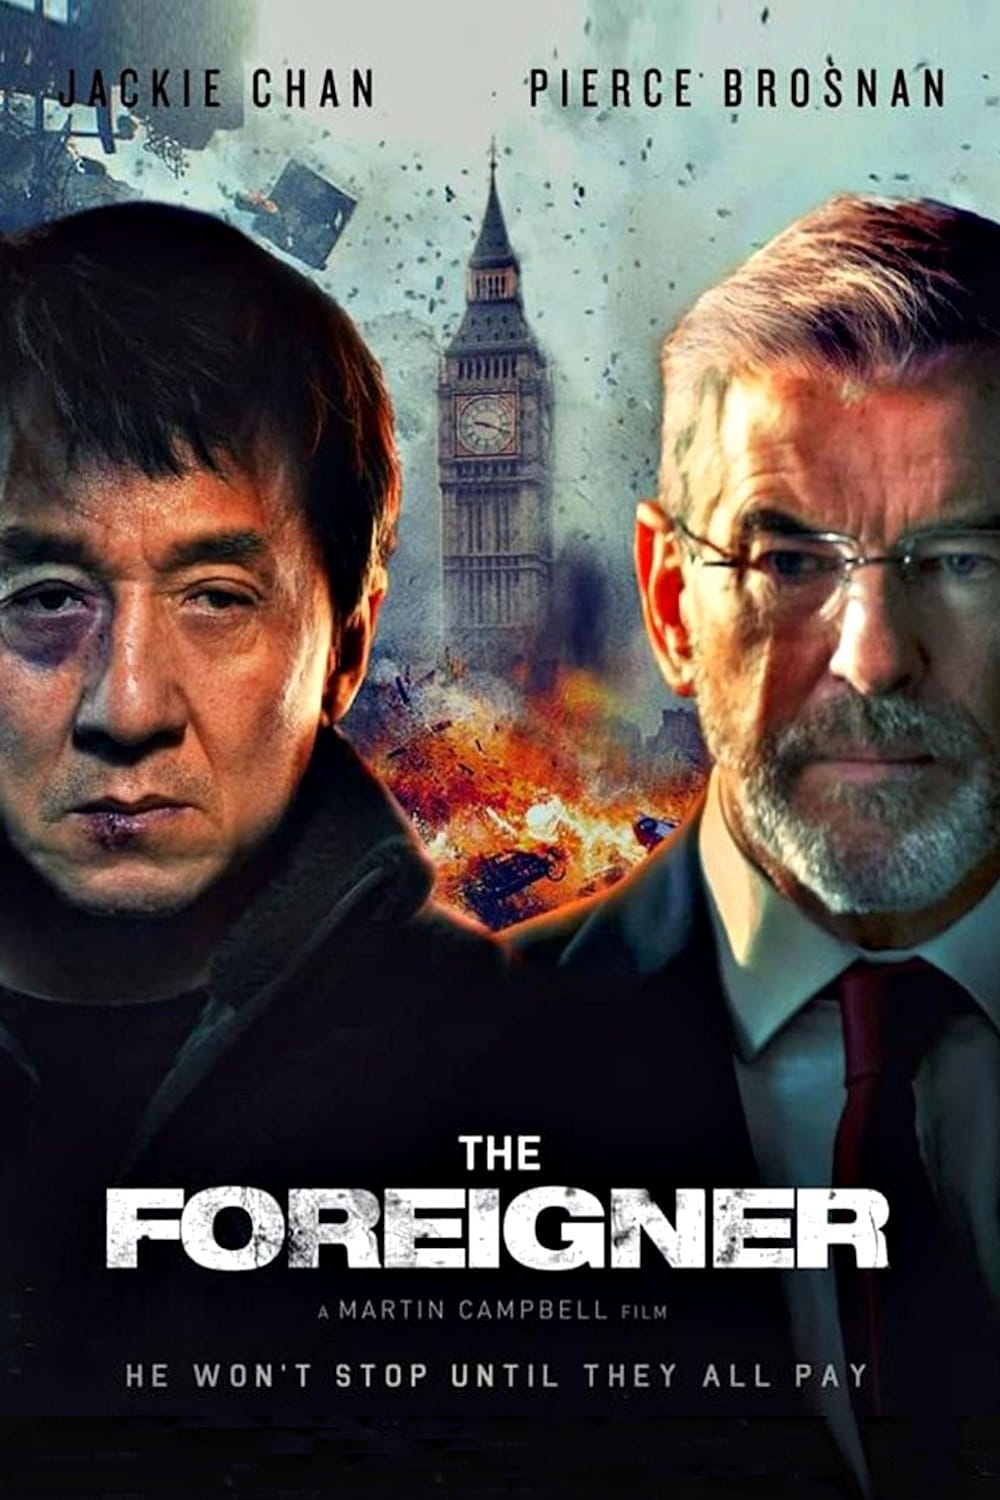 EN - The Foreigner (2017) JACKIE CHAN (ENG)